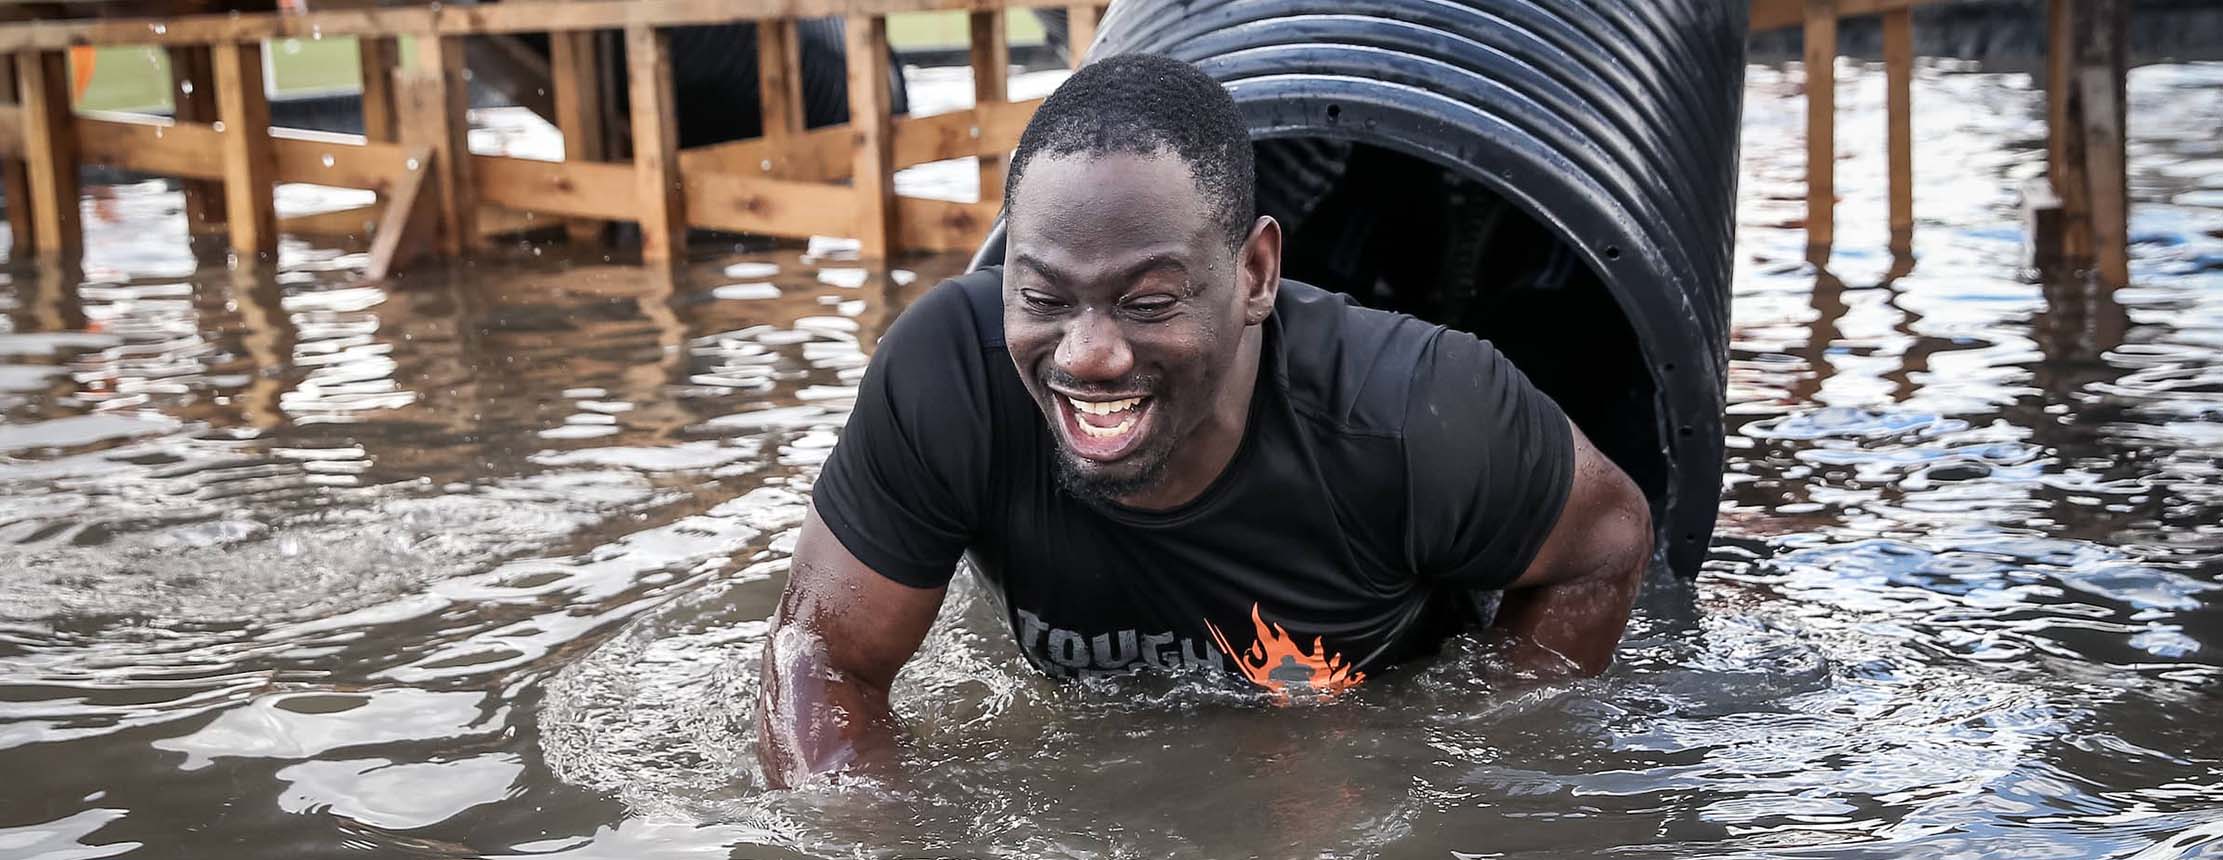 Tough mudder & spartan race come together for one ultimate event weekend